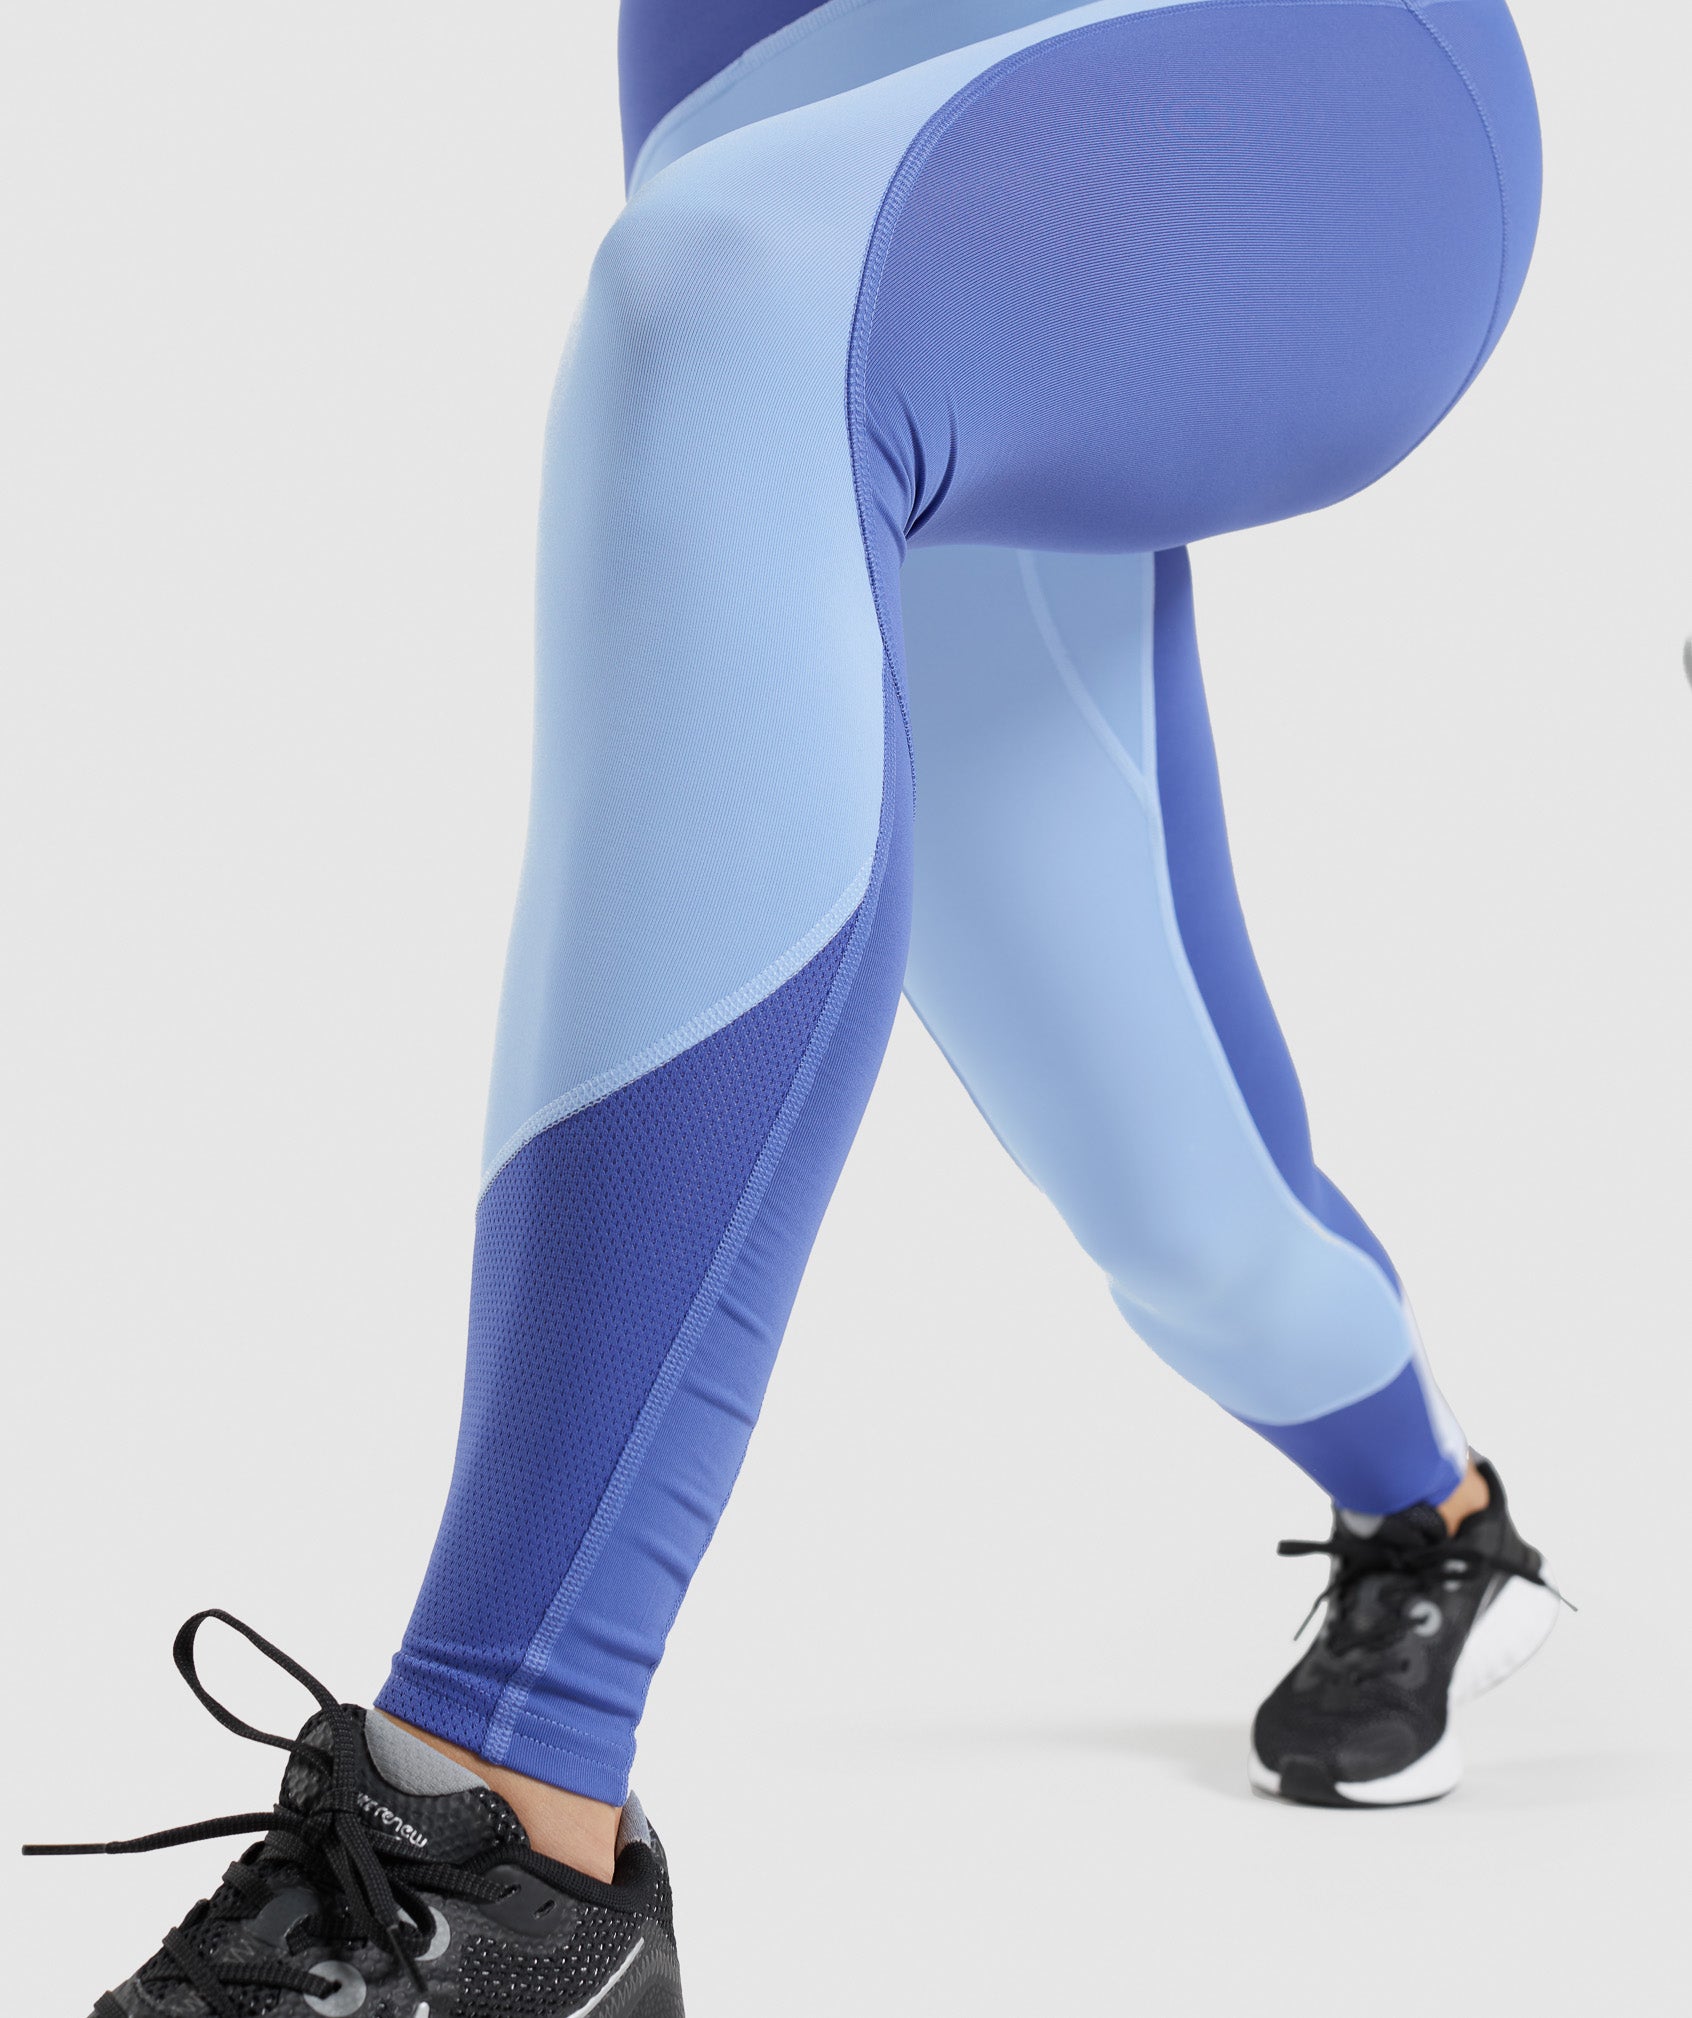 DOMYOS Leggings Mesh with Pocket, Women's Fashion, Activewear on Carousell